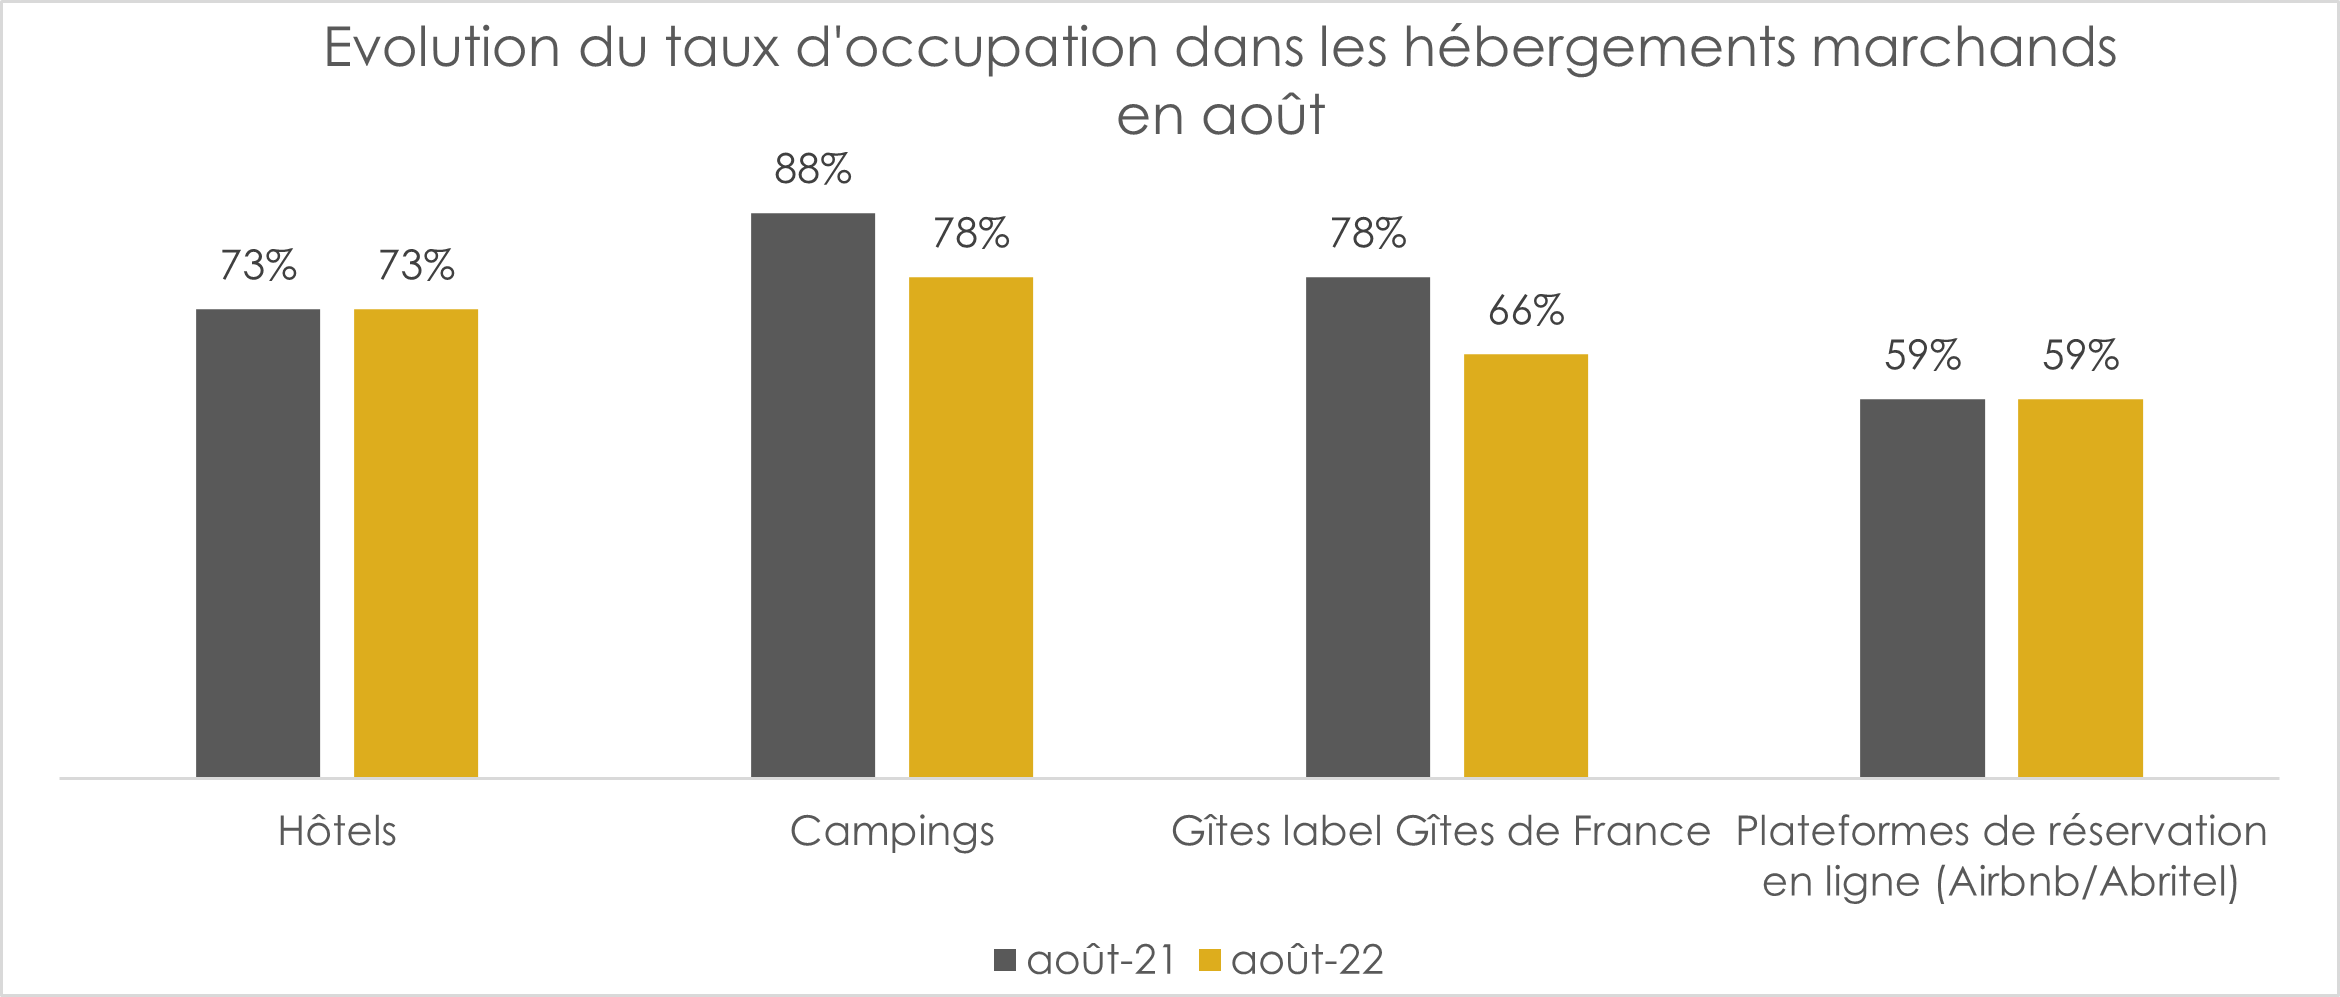 taux-occupation-herbergements-oise-ete-aout-2022